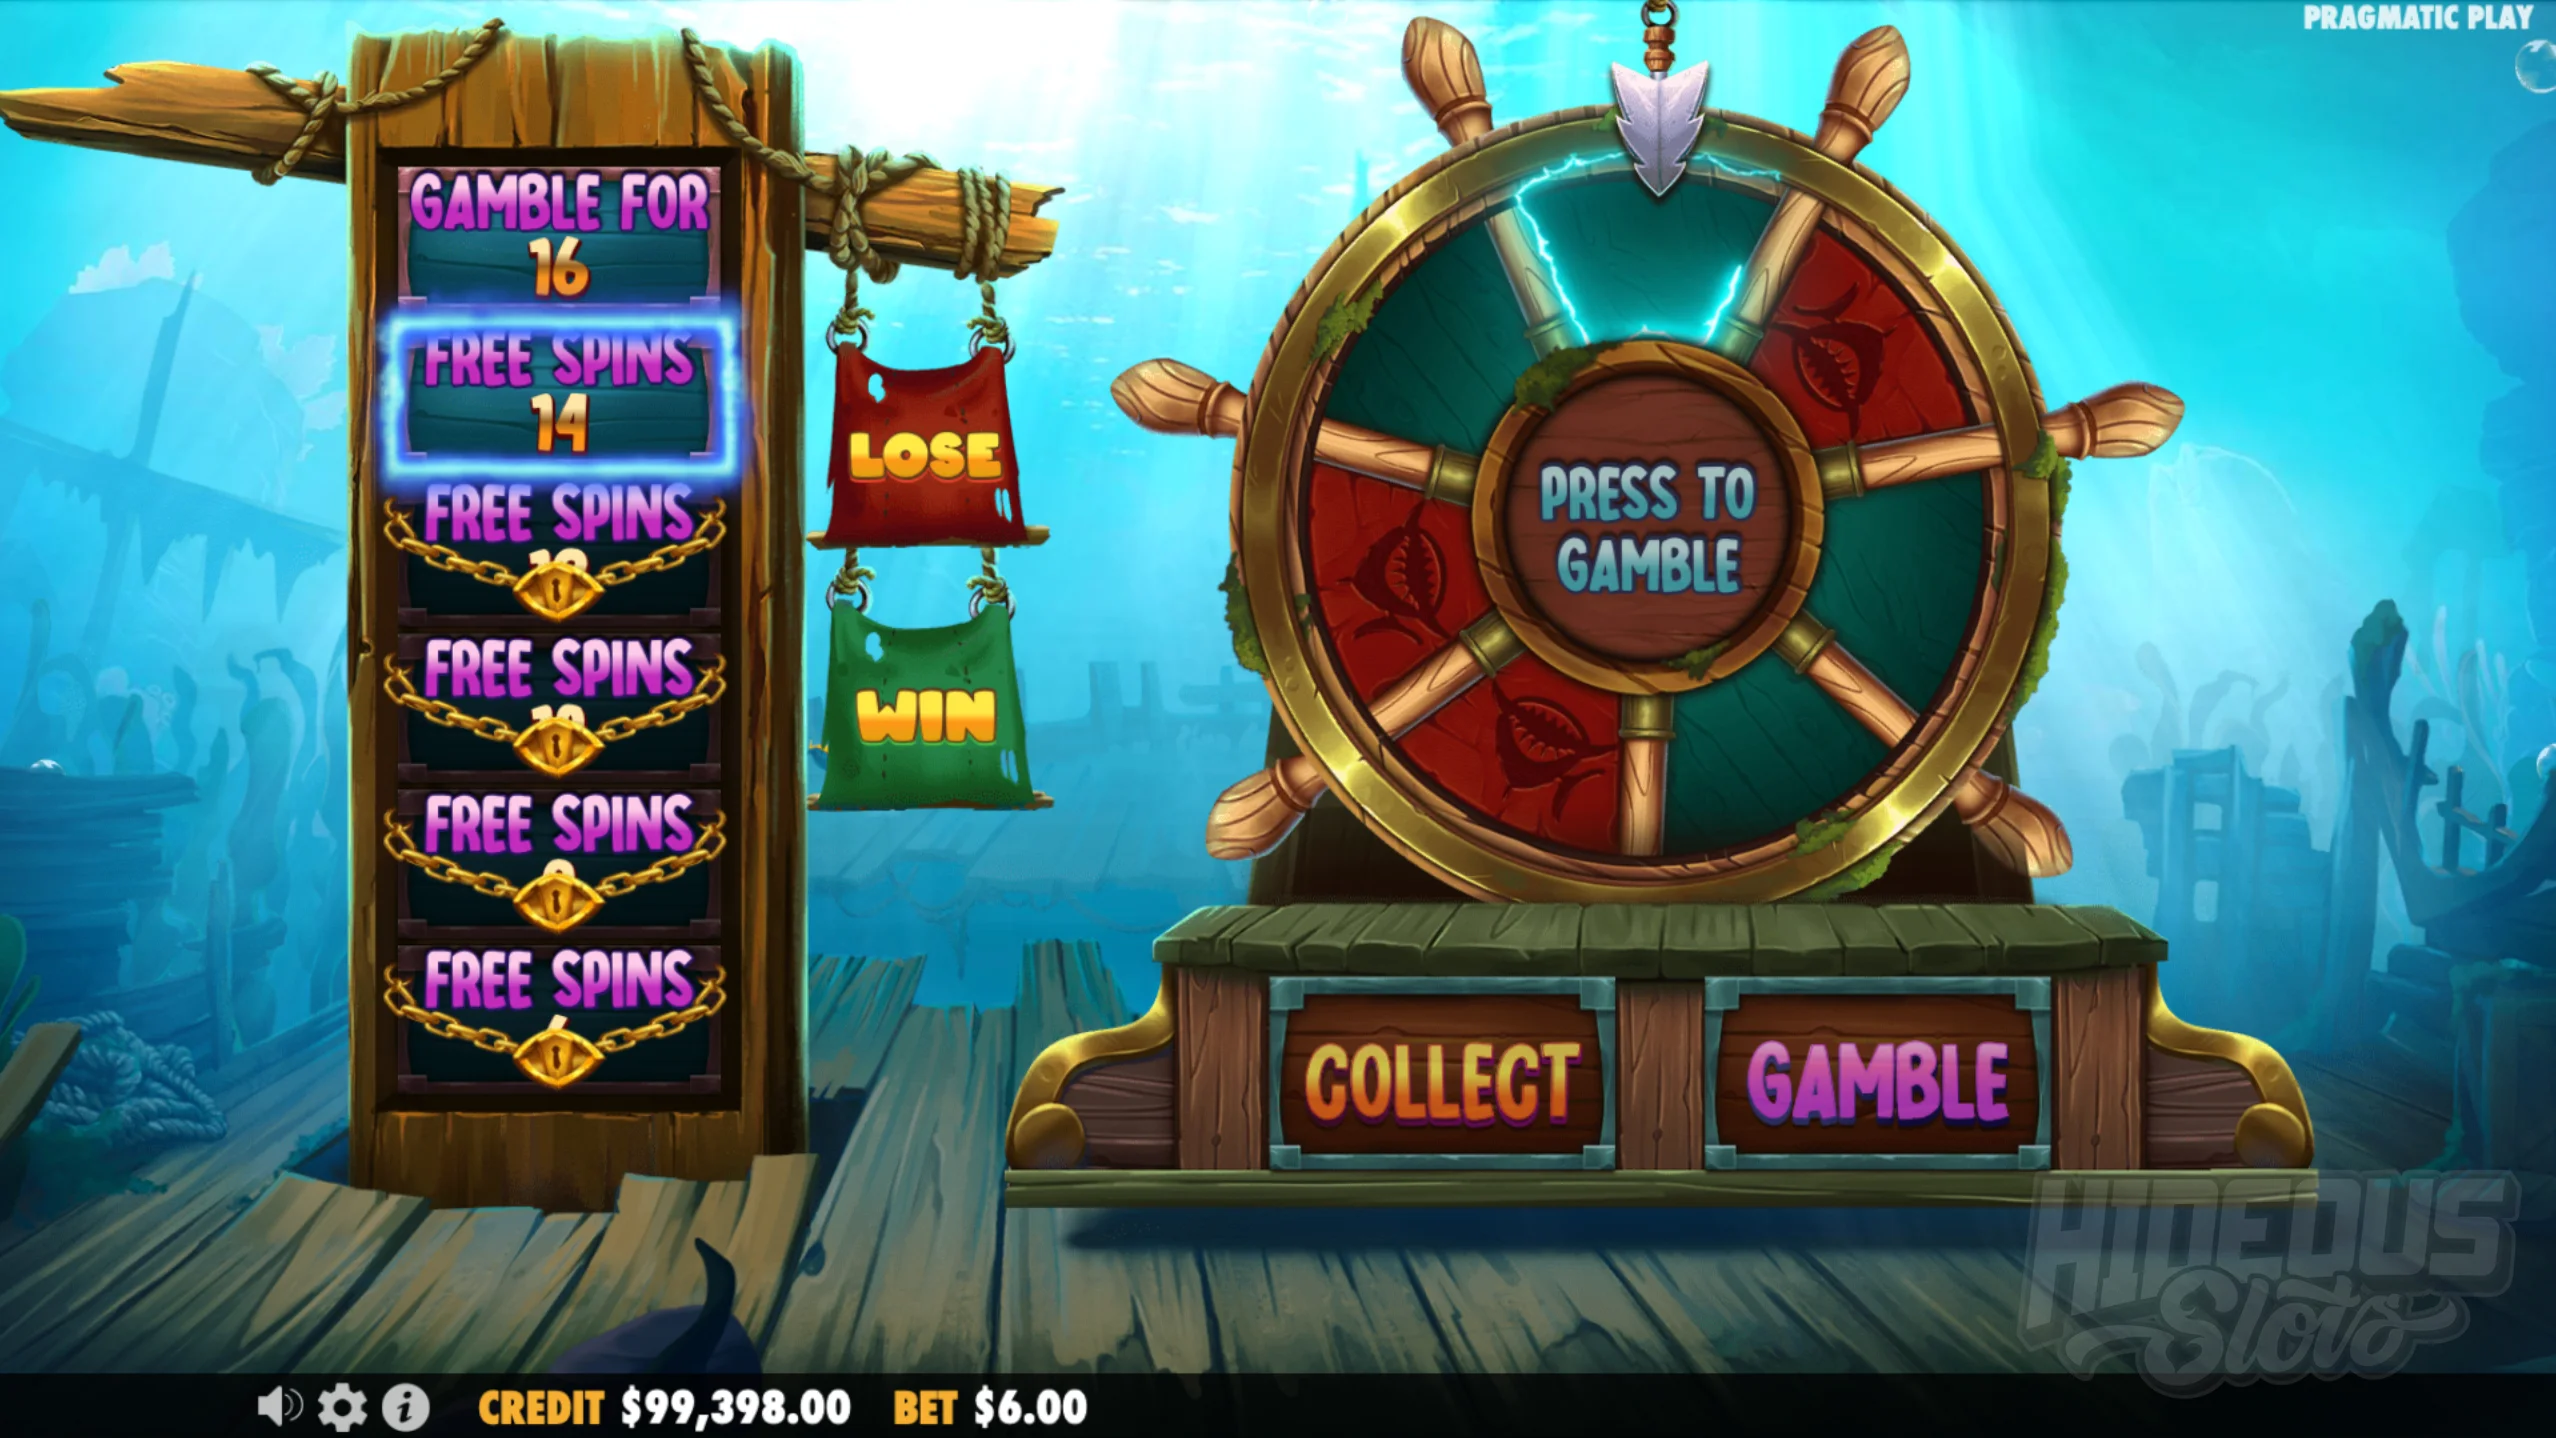 Gamble up to 16 Spins in The Deep Free Spins or up to a 30x Multiplier in Even Deeper Free Spins